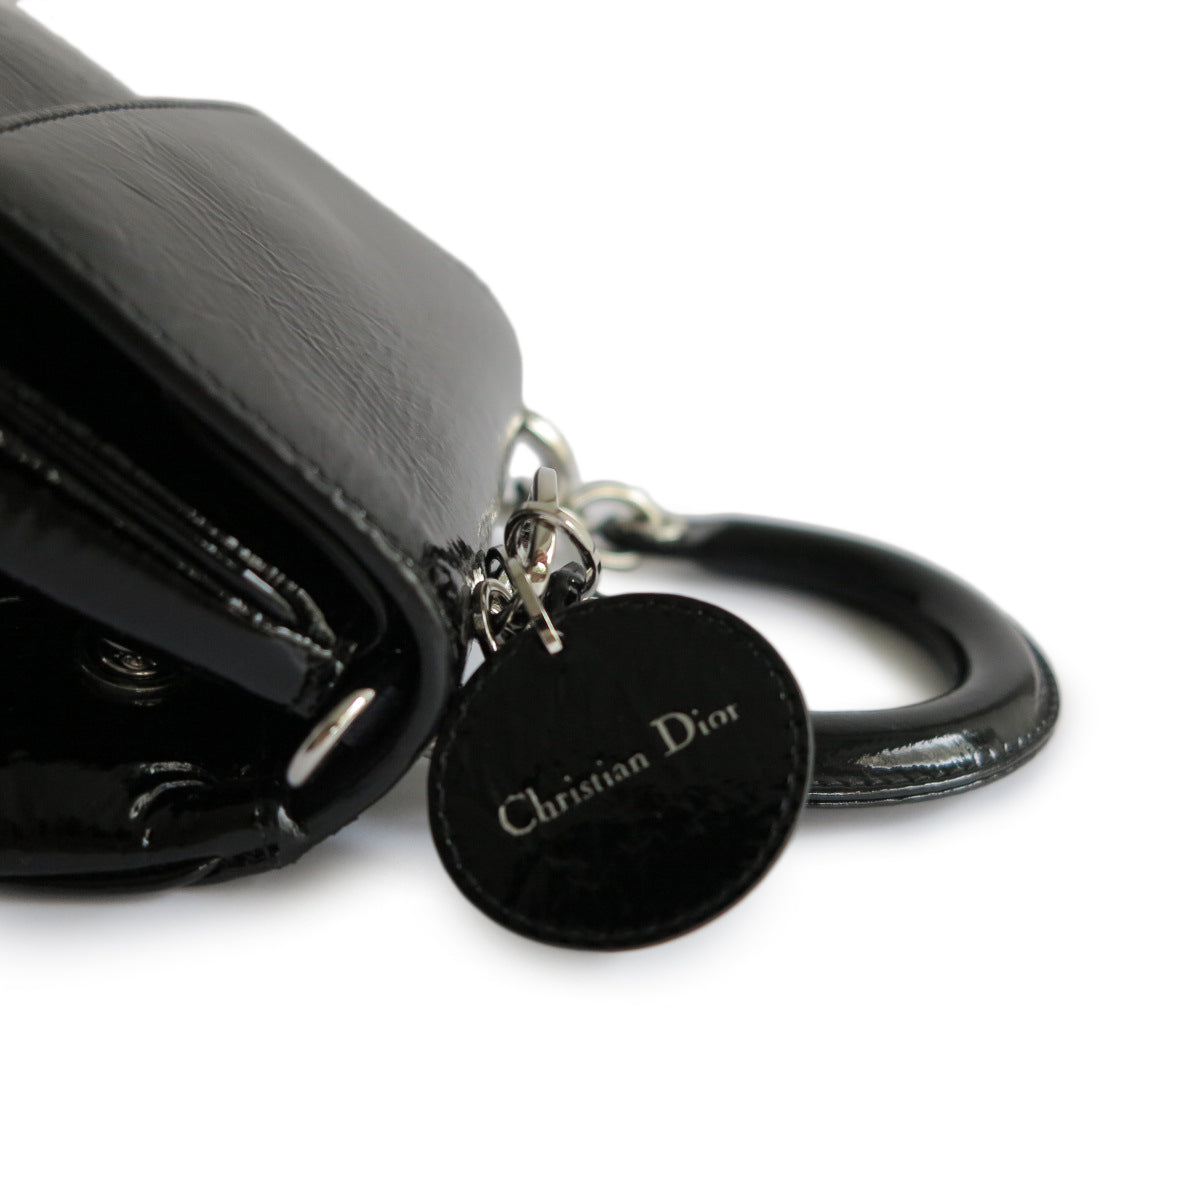 Micro Be Dior Bag in Black Patent Leather